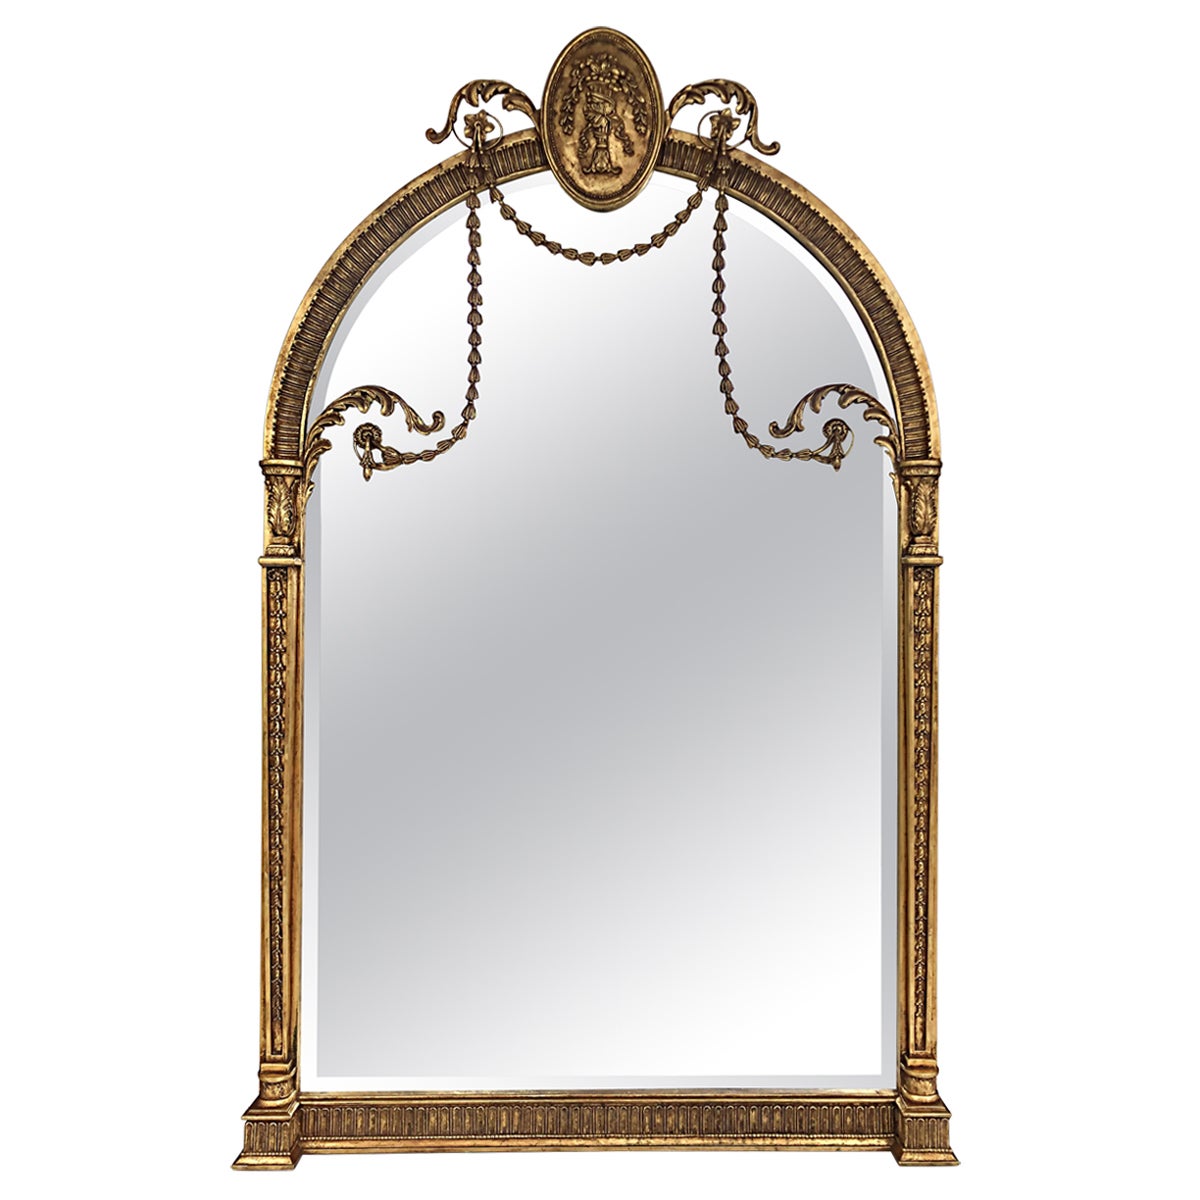 Giltwood Monumental Beveled Mirror Wall Mirror with Swags